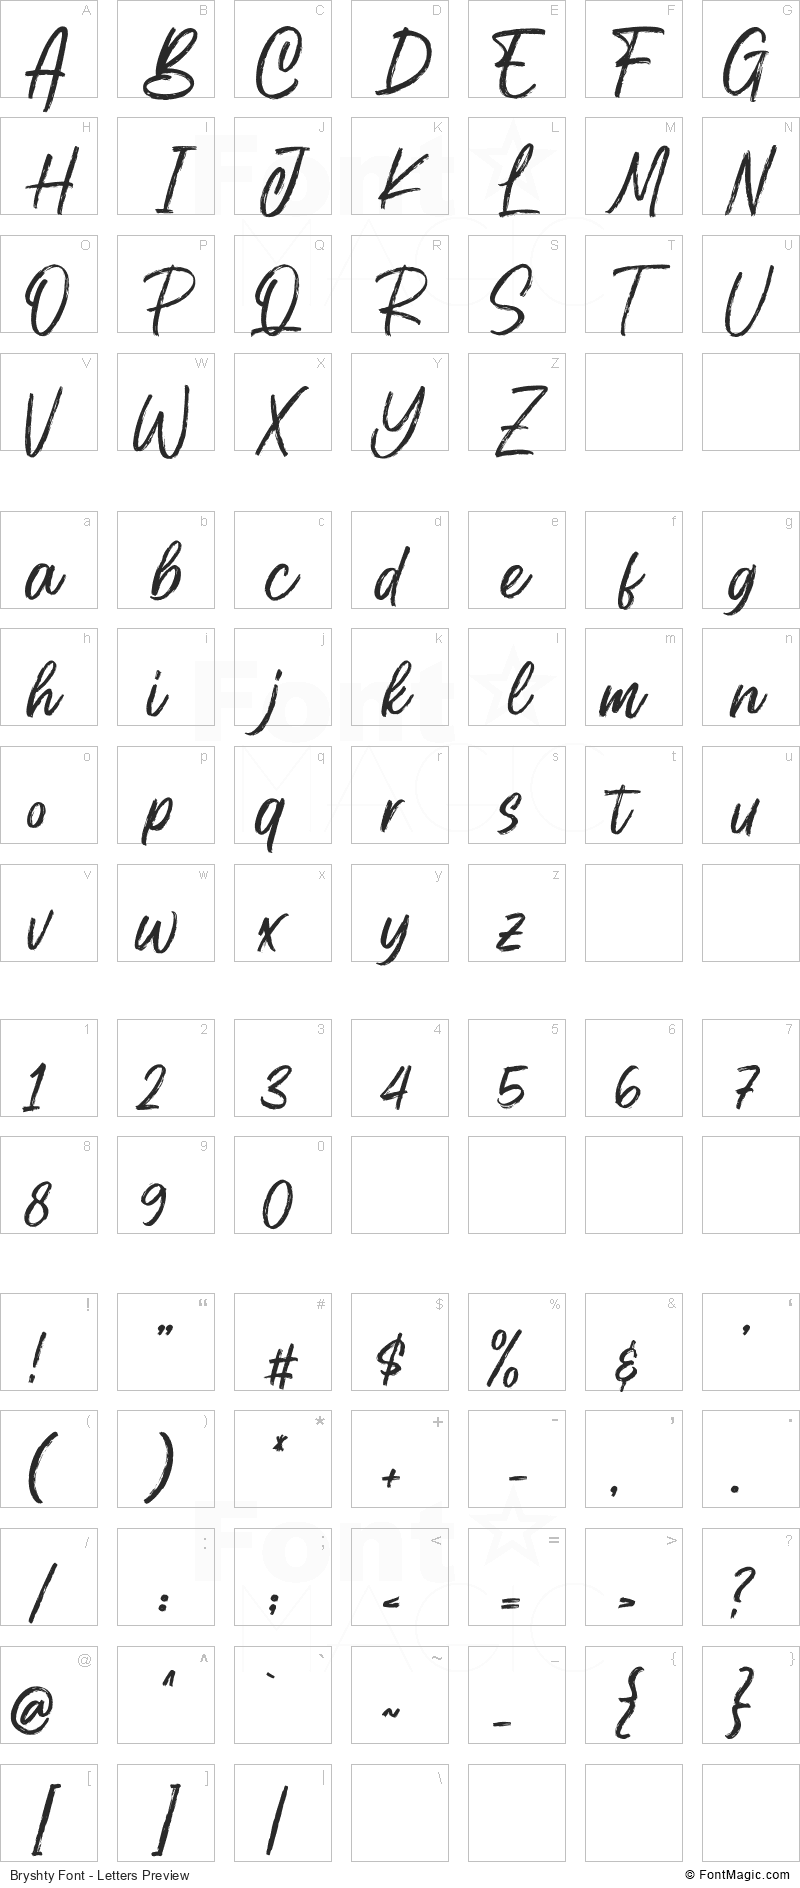 Bryshty Font - All Latters Preview Chart